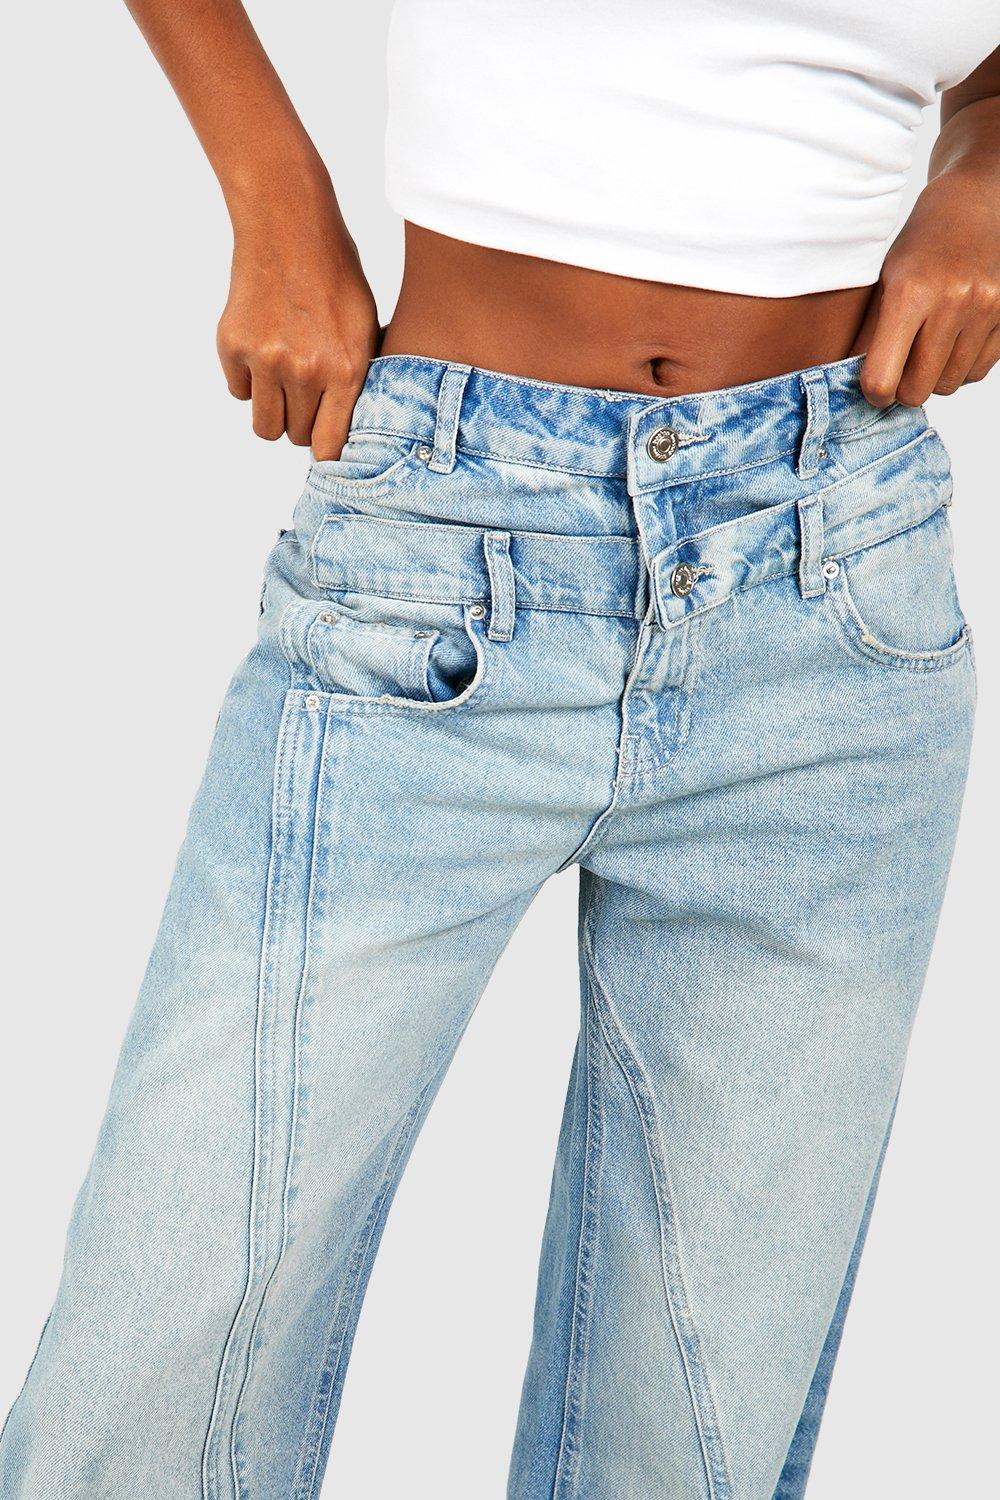 Double Denim January 5th Women's Distressed Skinny Denim Jeans Stretch  Elastic Waistband Comfy Casual Pants DJ-03 Light Blue S at  Women's  Jeans store